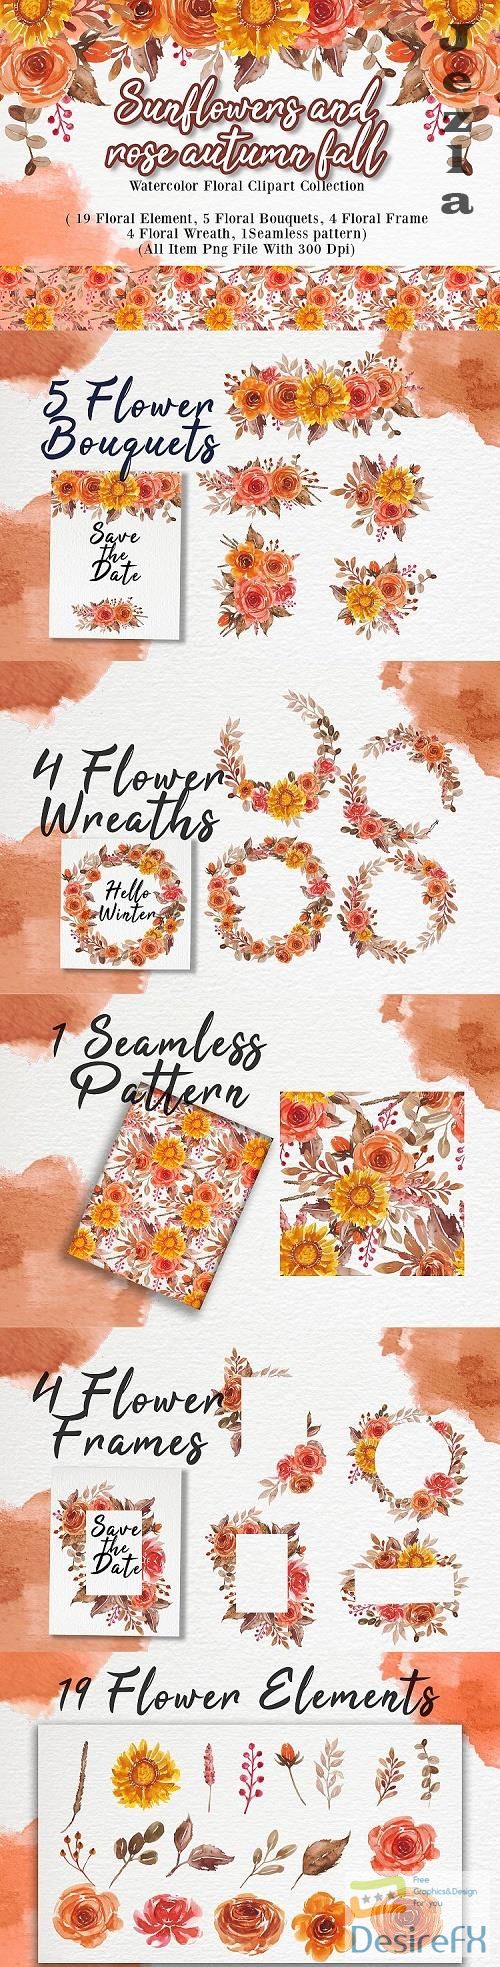 Sunflowers and rose autumn fall watercolor illustration set - 537098